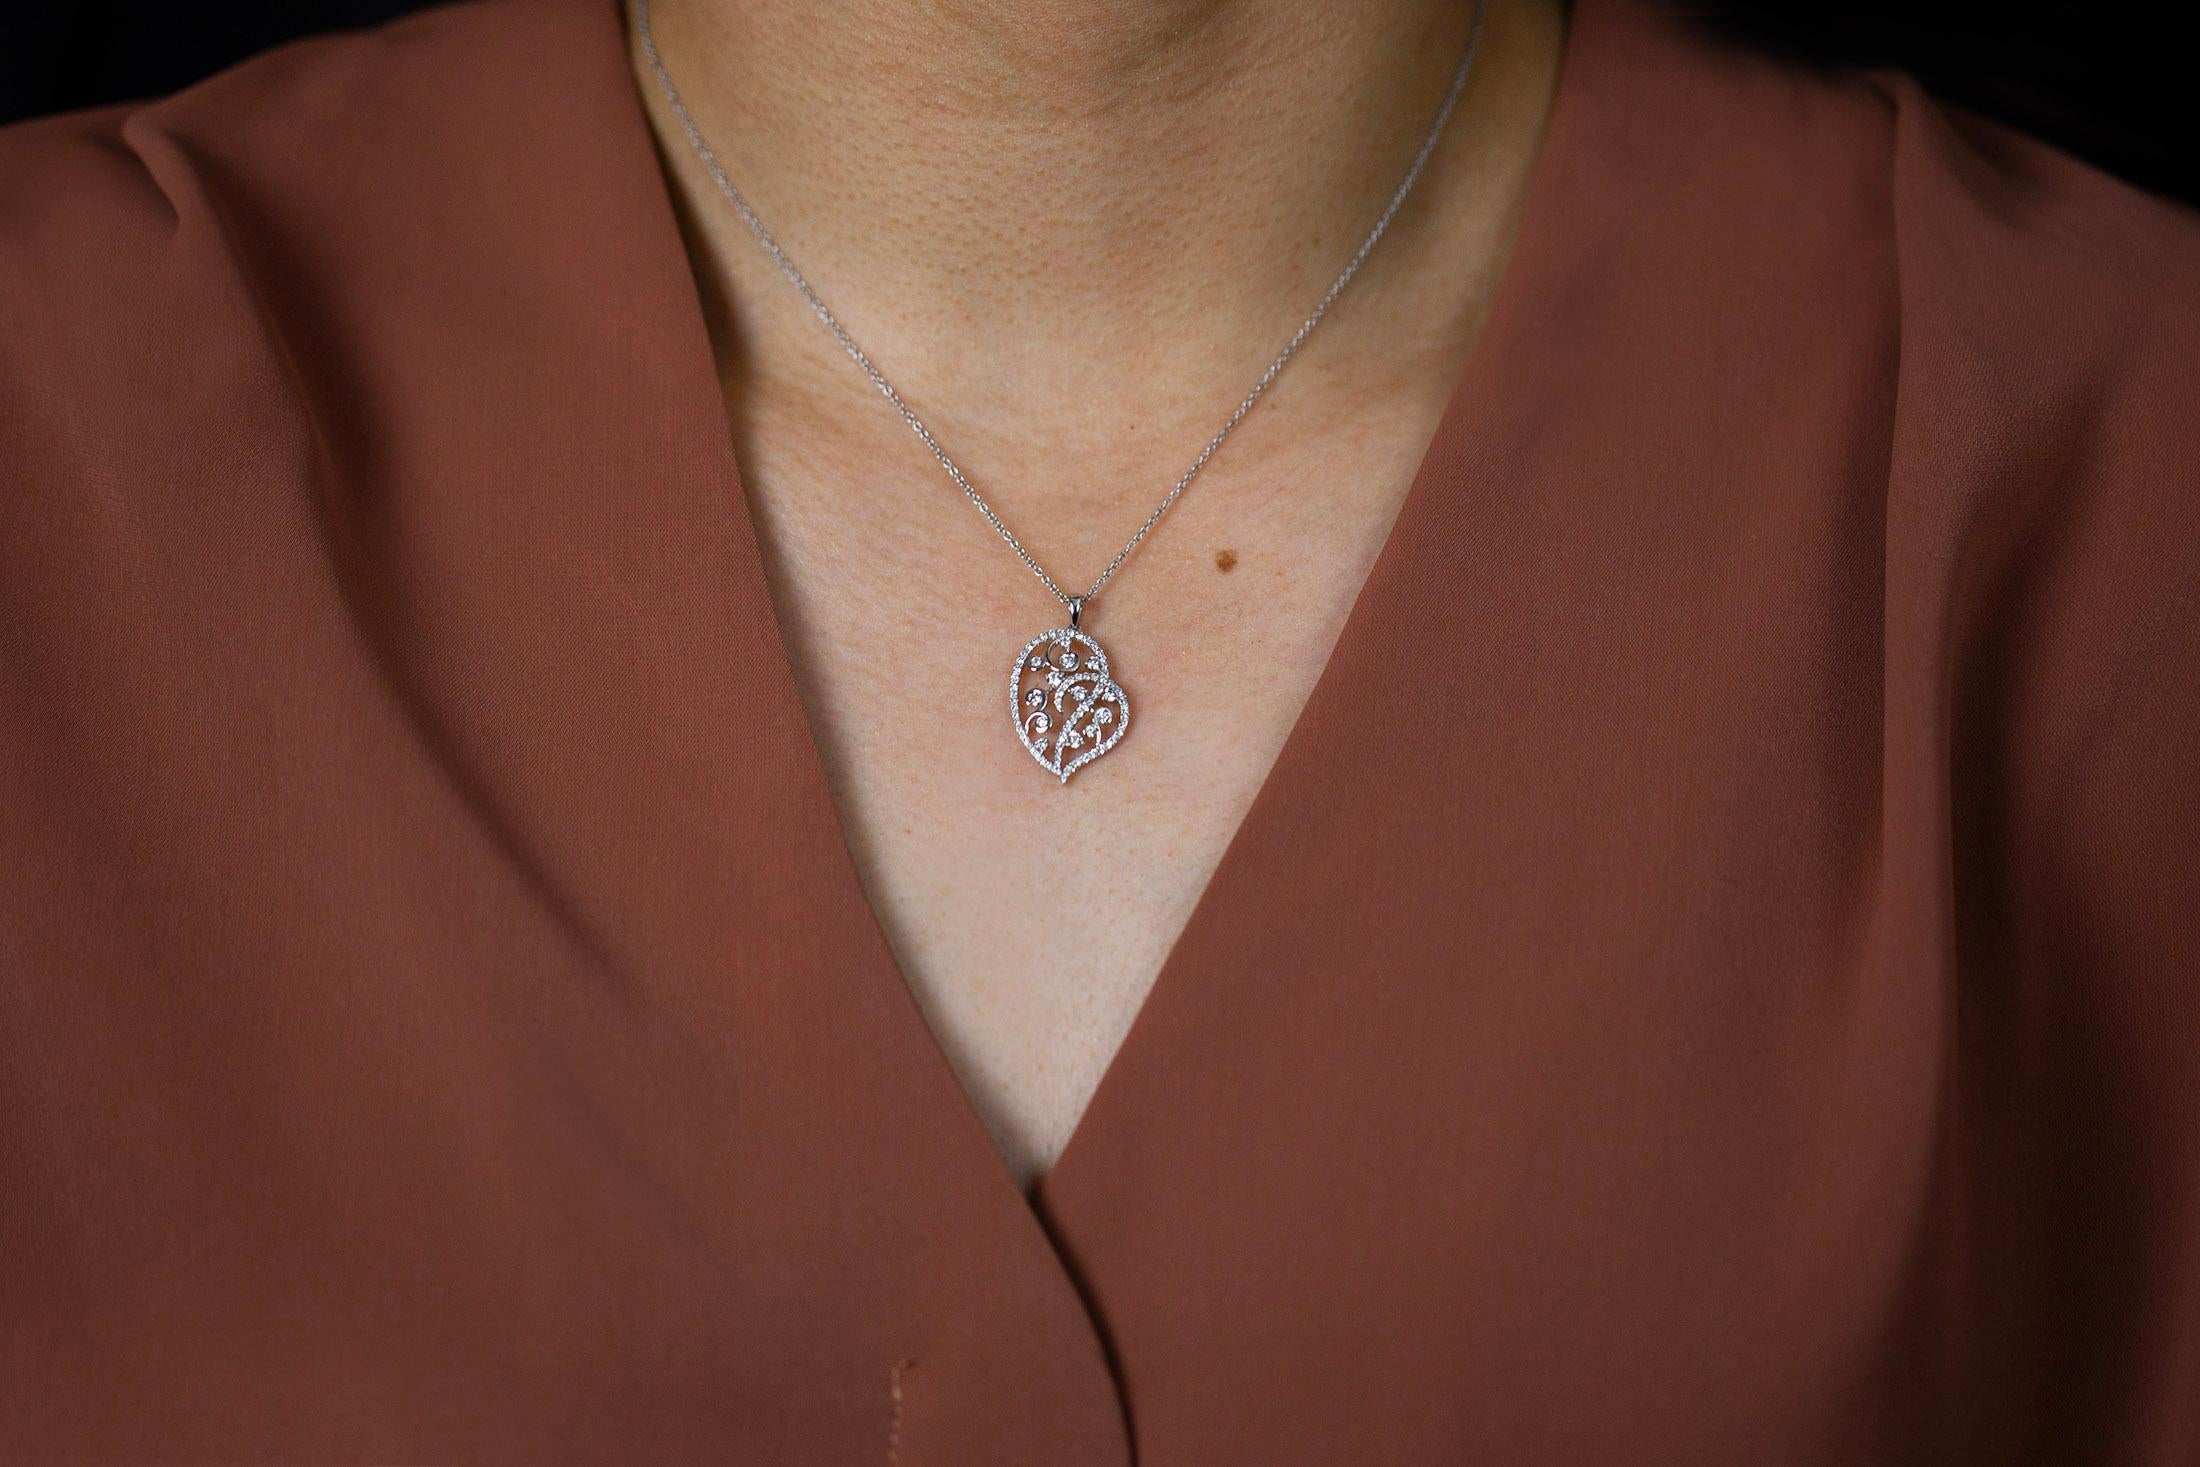 This fashionable pendant necklace features an intricate open-work heart shape design set with diamonds for that added sparkle. Diamonds weigh 0.69 carats total. Finely made in 18k white gold composition and suspended on an 18 inches adjustable